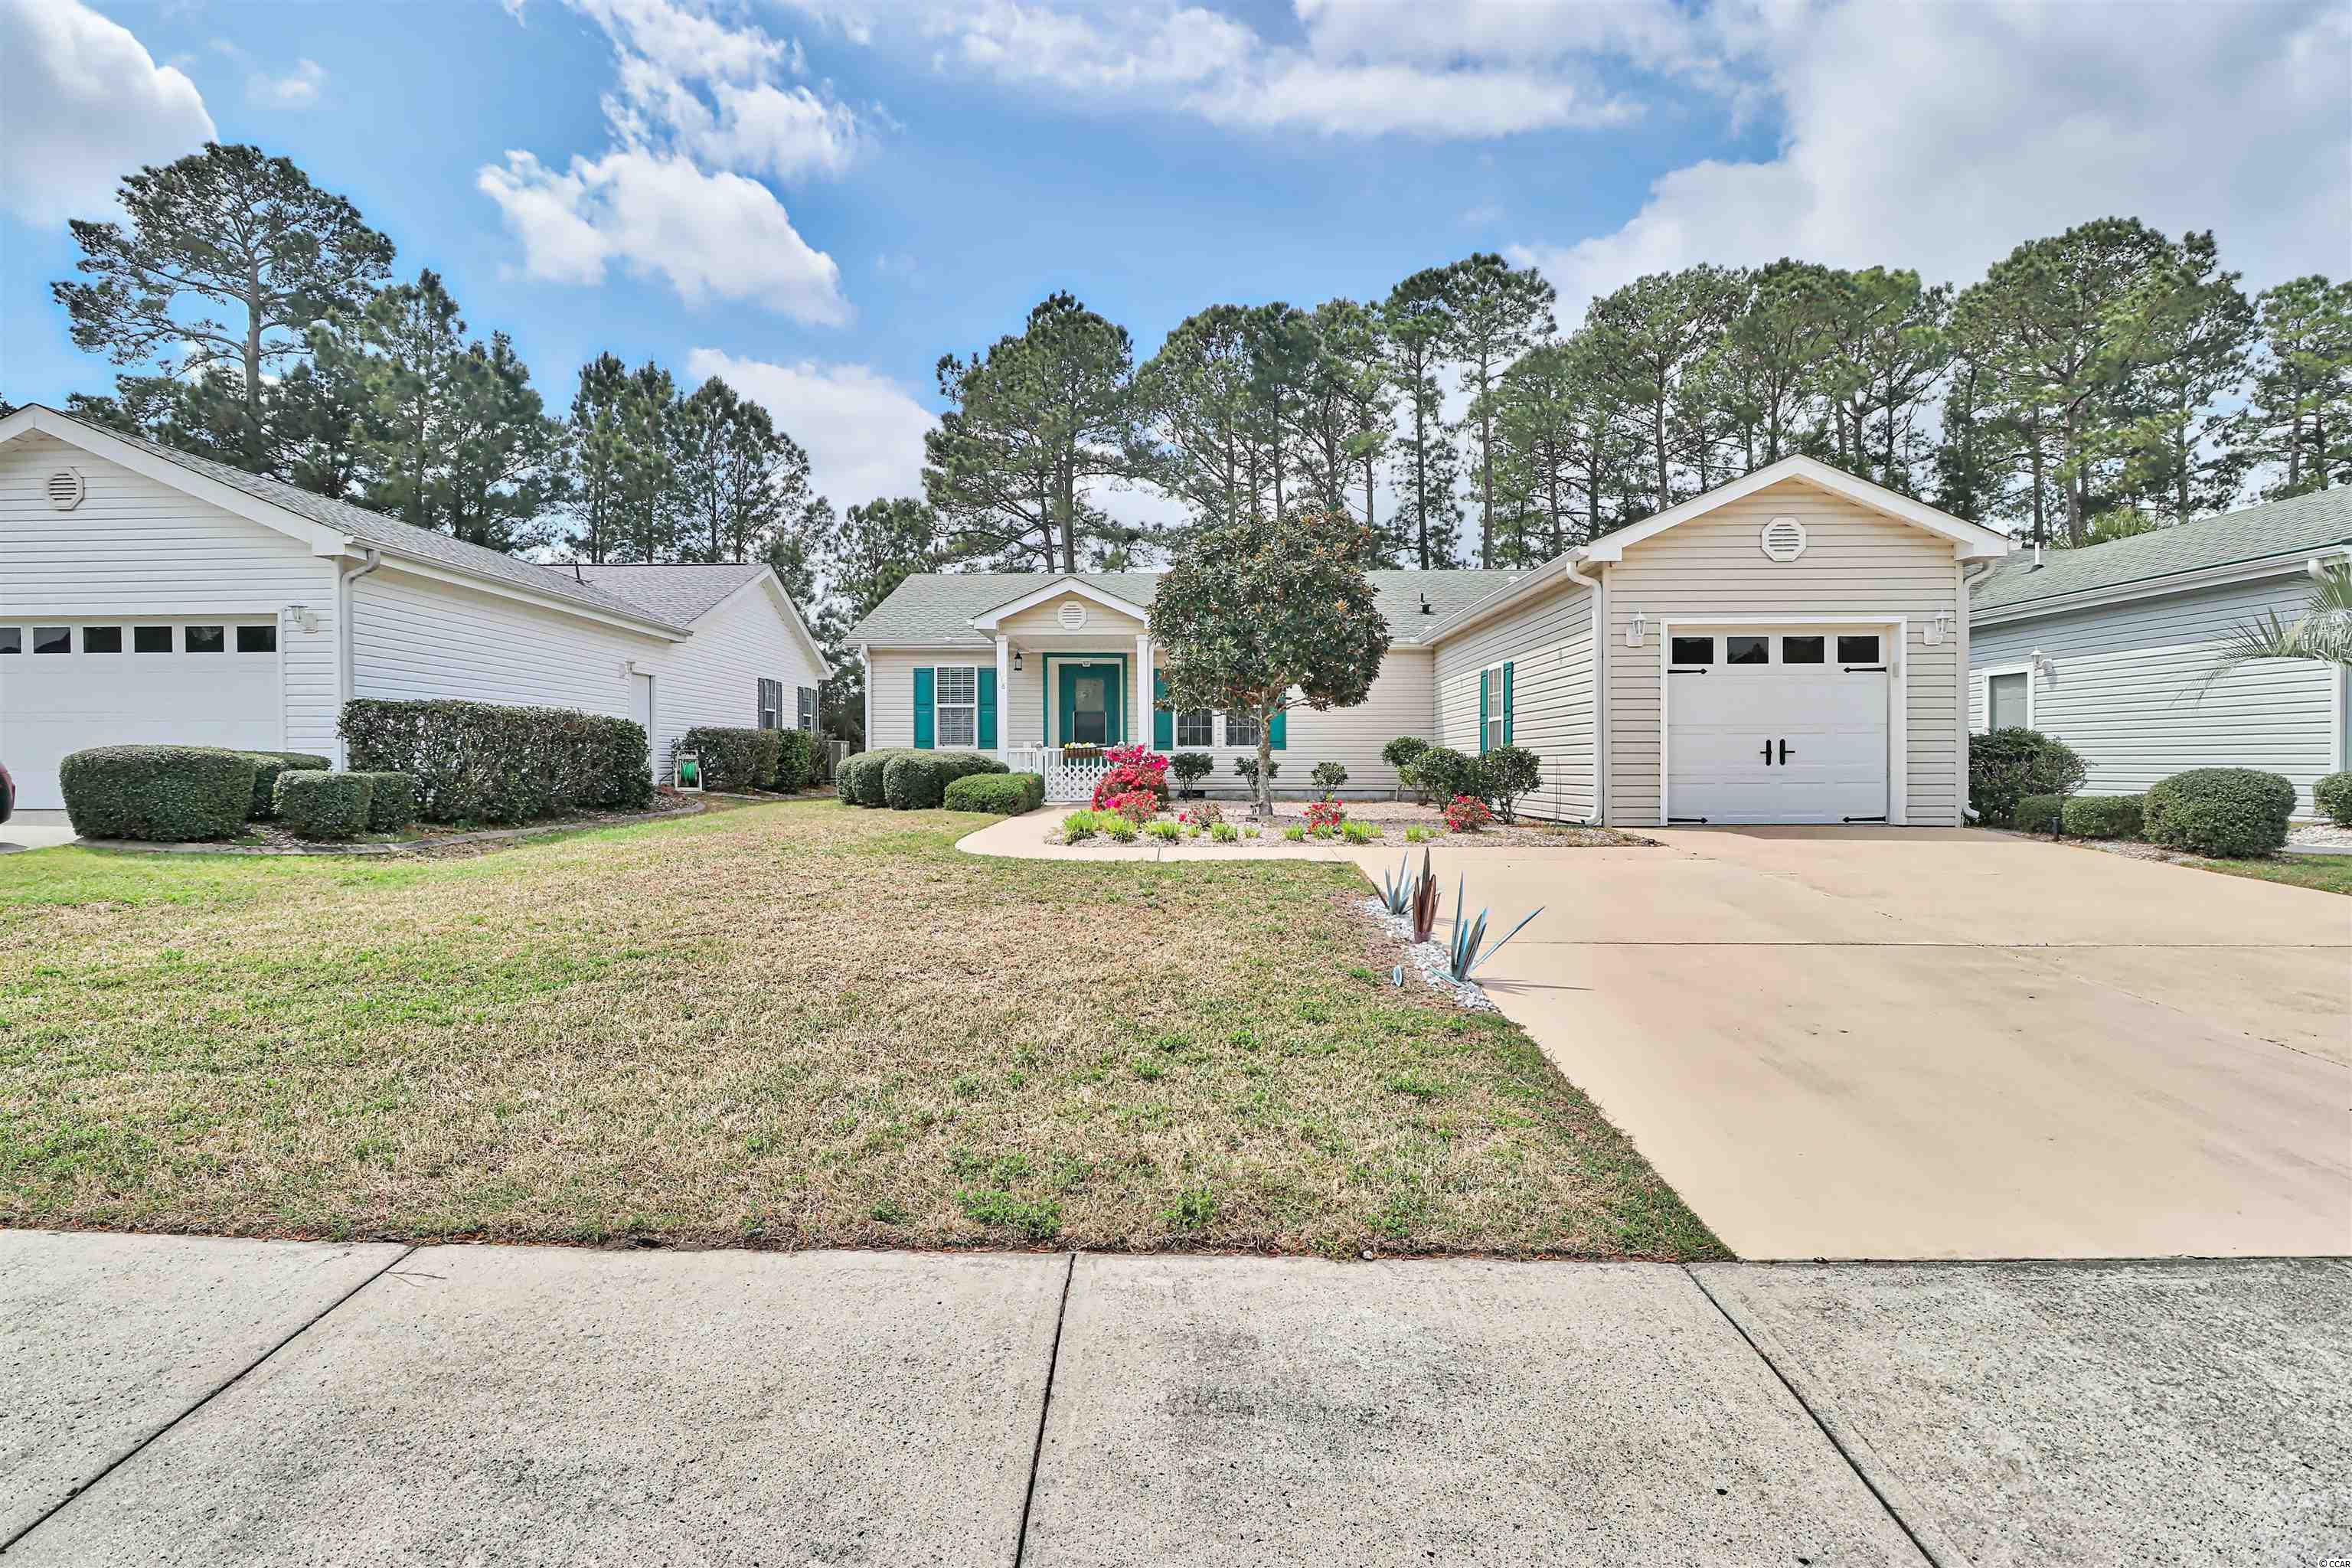 118 Lakeside Crossing Dr., Conway, SC 29526